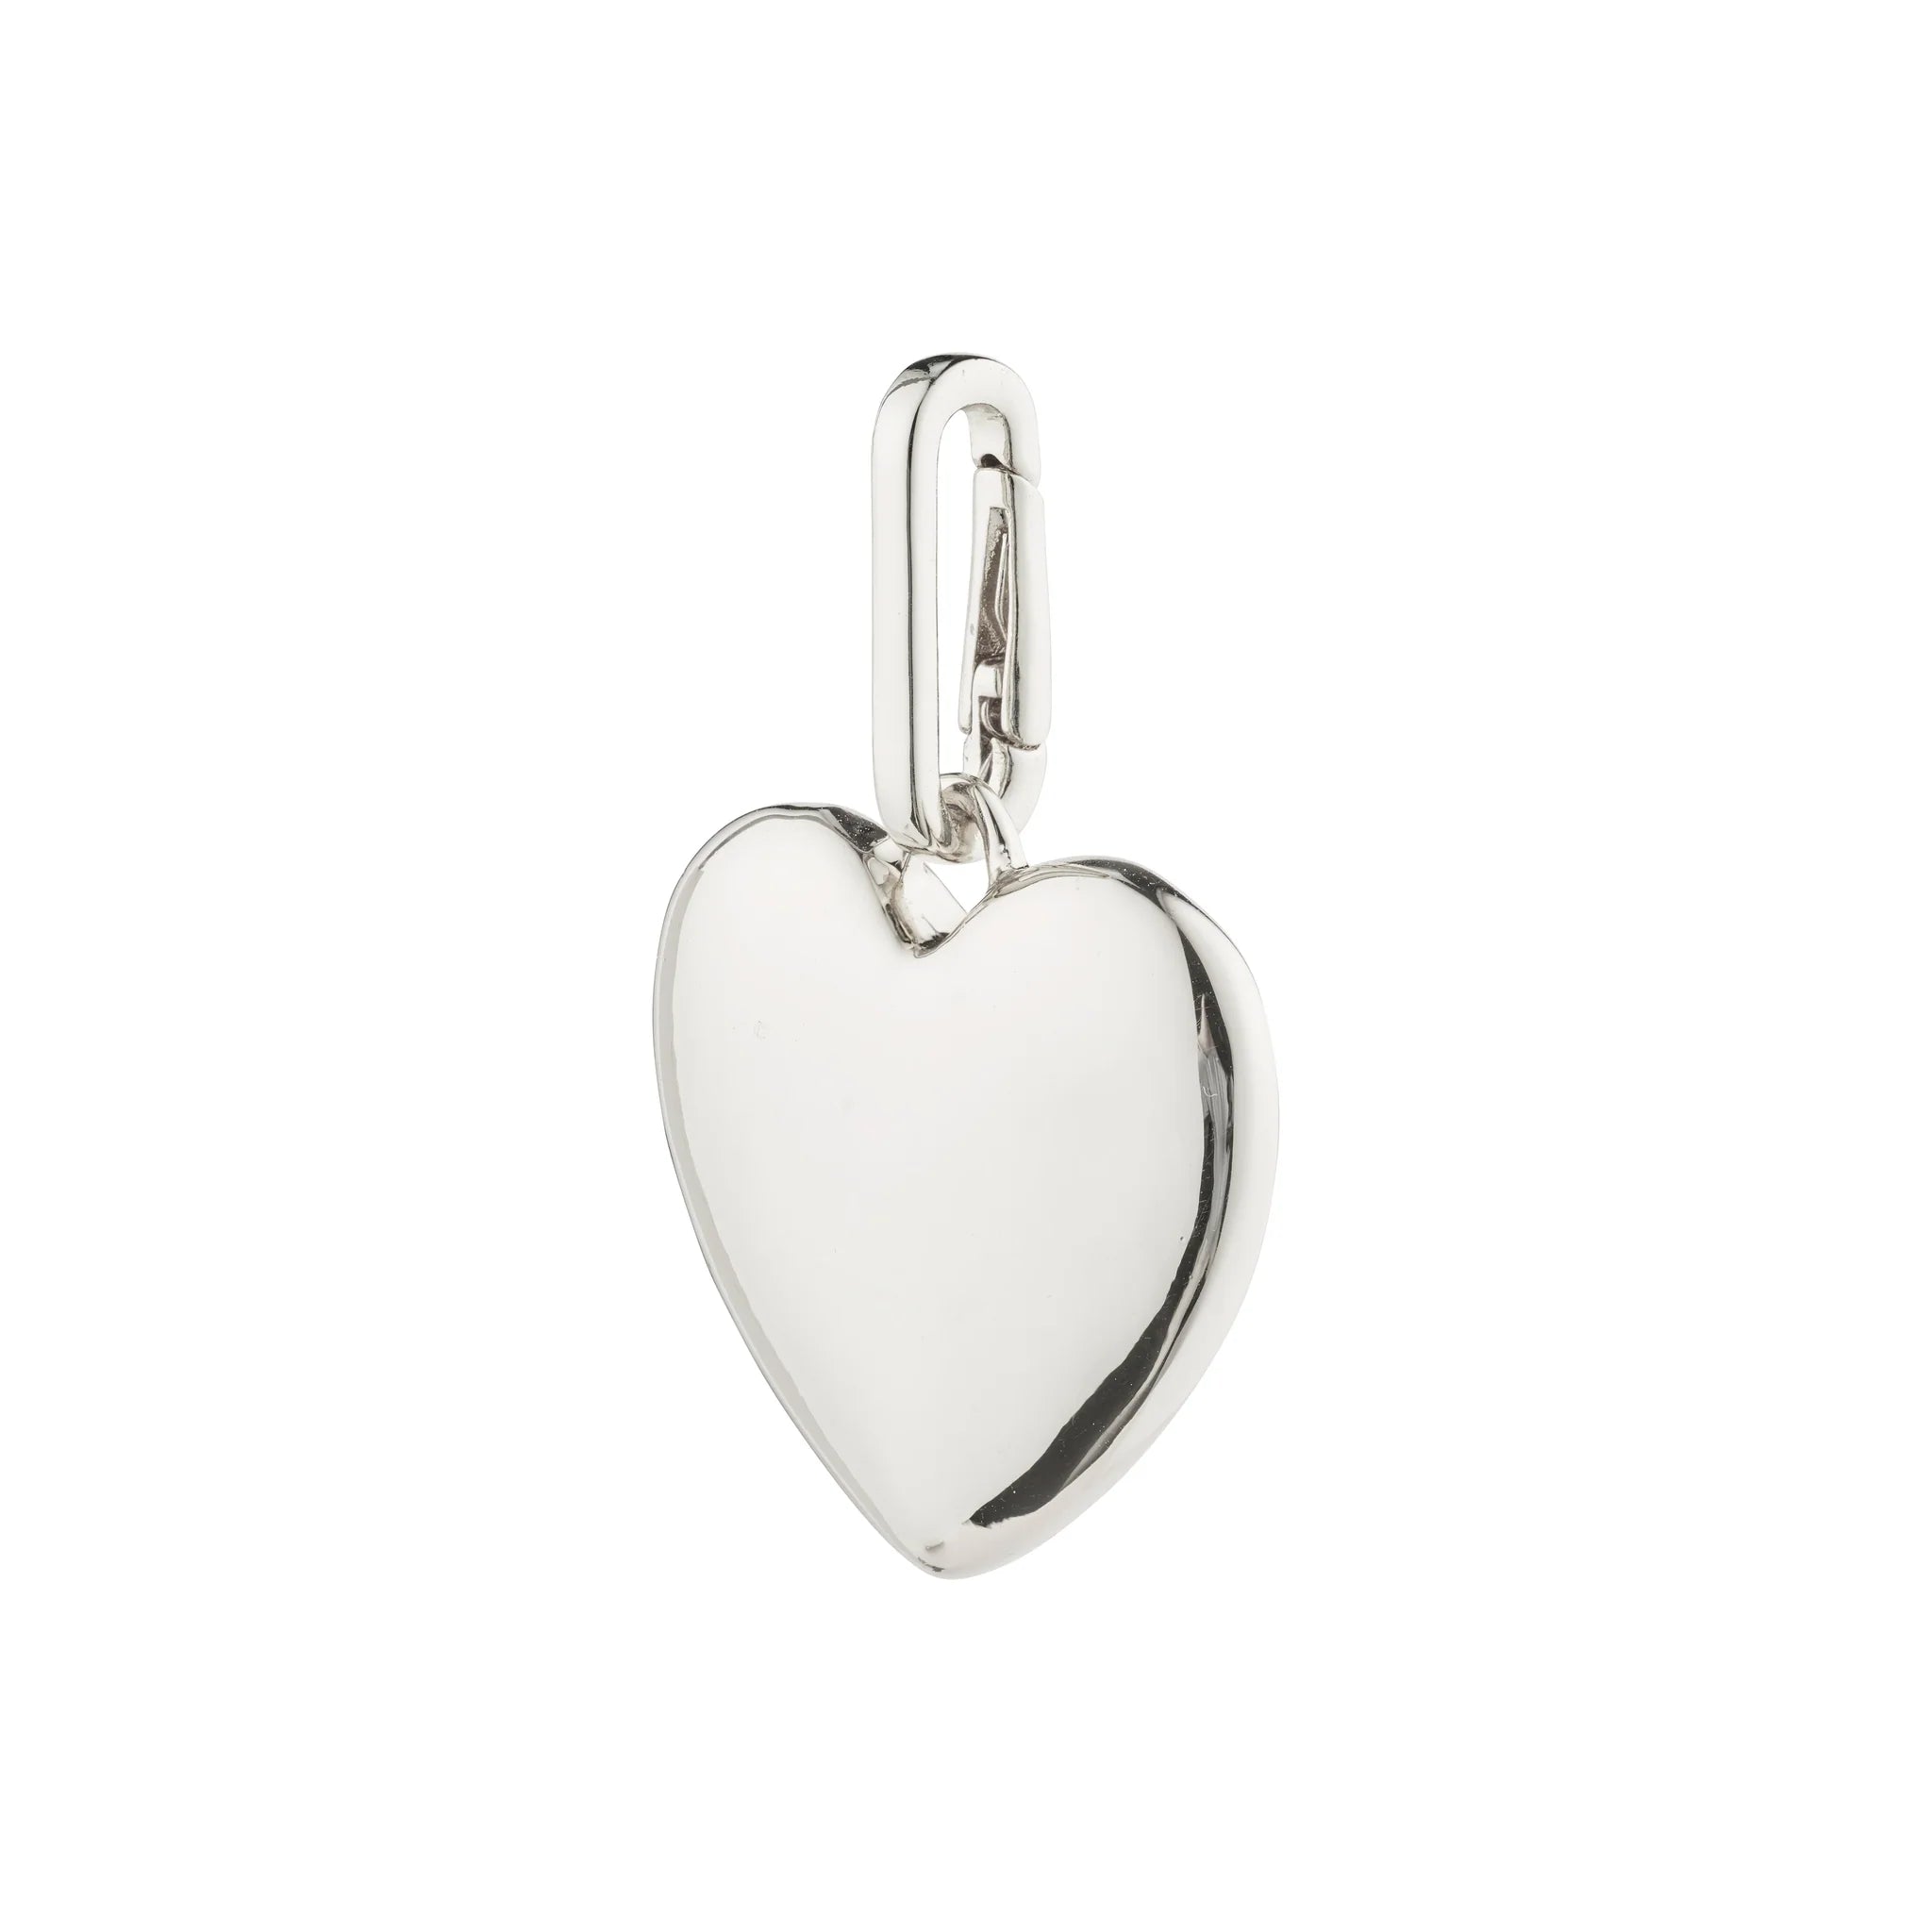 CHARM Maxi Heart pendant silver-plated